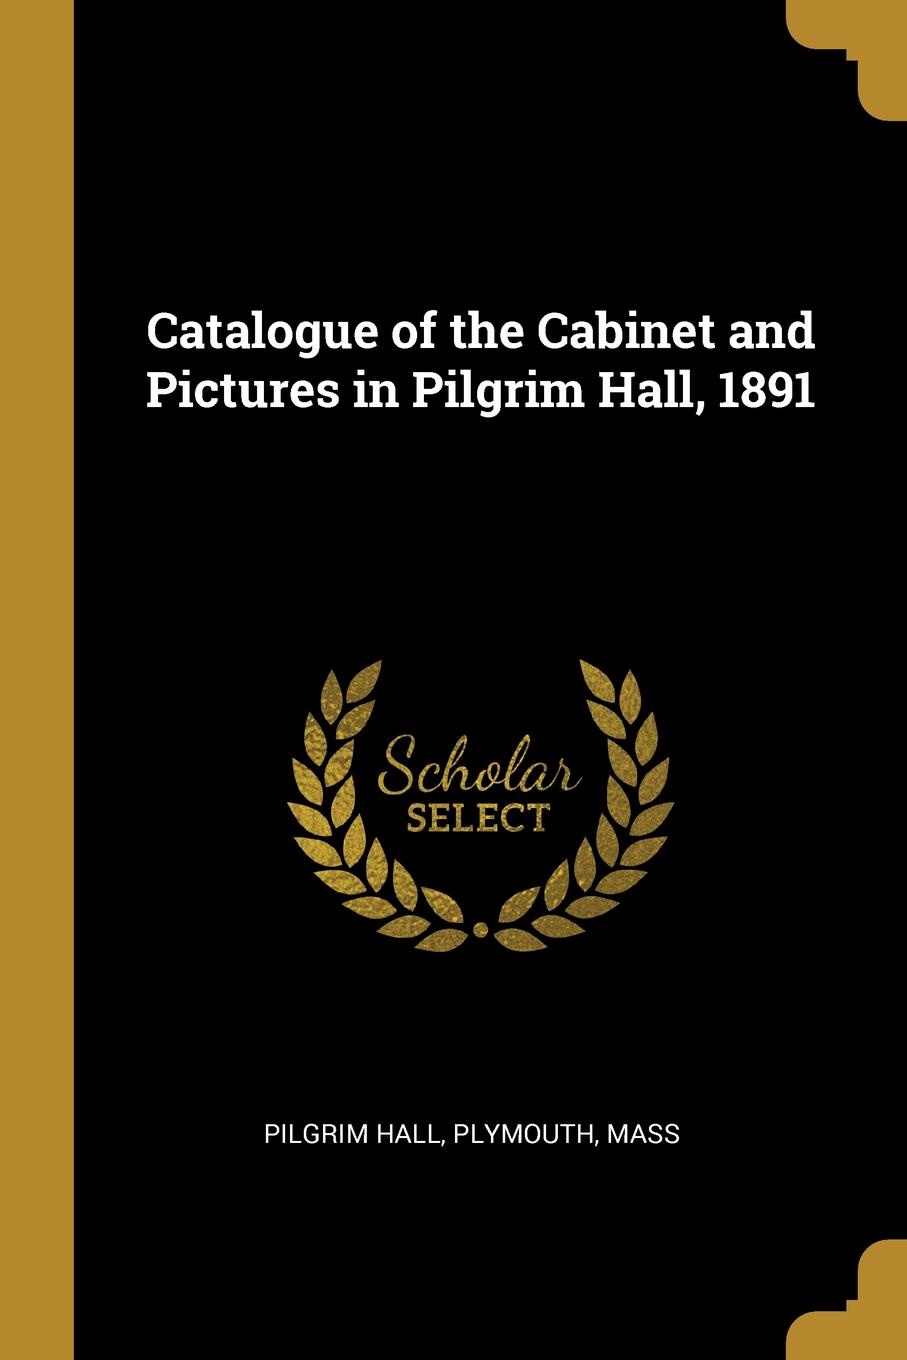 Catalogue of the Cabinet and Pictures in Pilgrim Hall, 1891